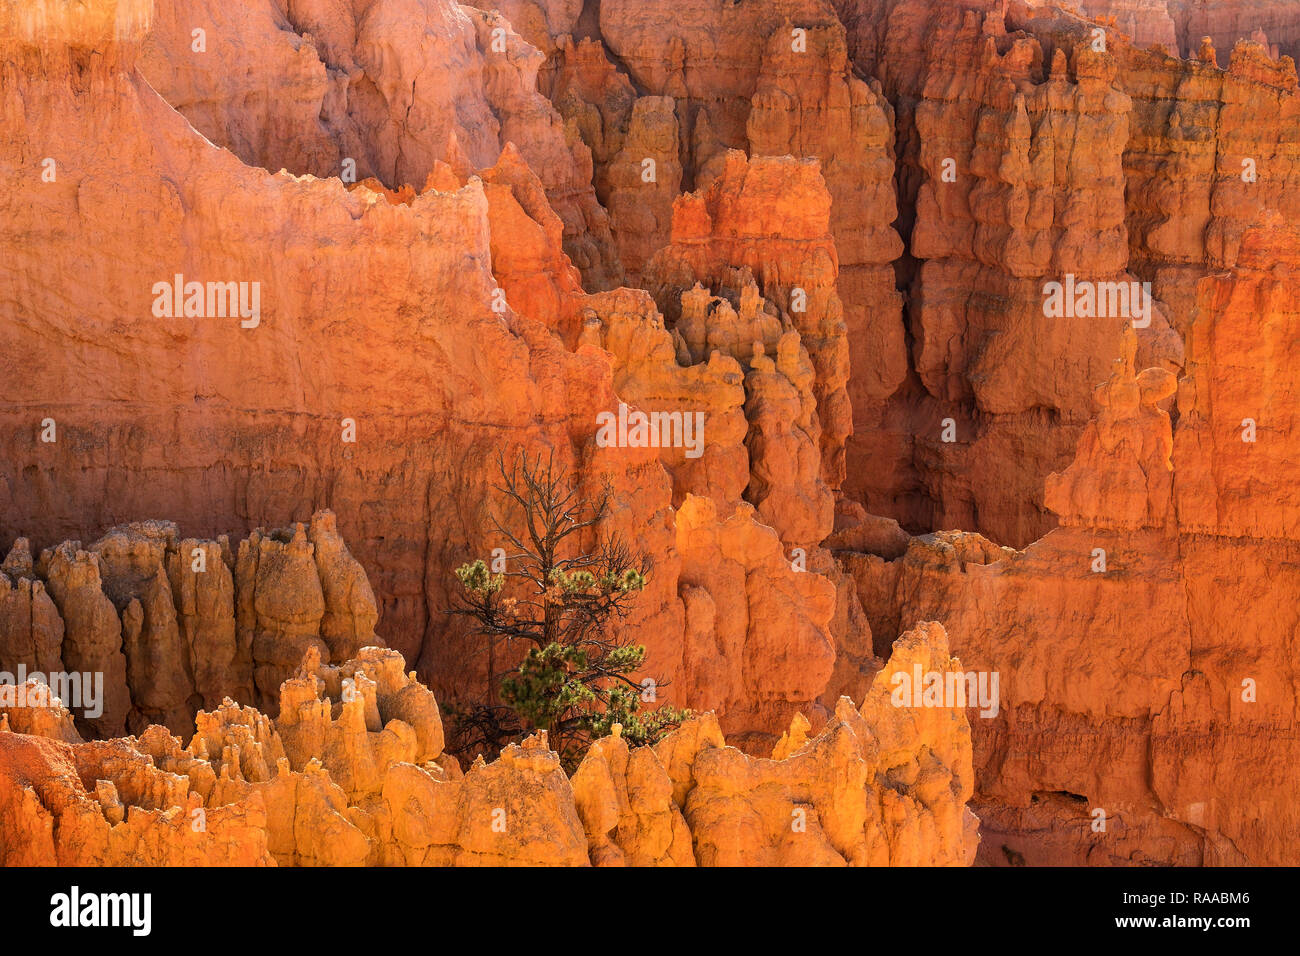 Bryce Canyon National Park, Utah, USA. View over the Bryce Amphitheatre from the Rim Trail, showing Hoodoo rock formations and single Pine tree. Stock Photo